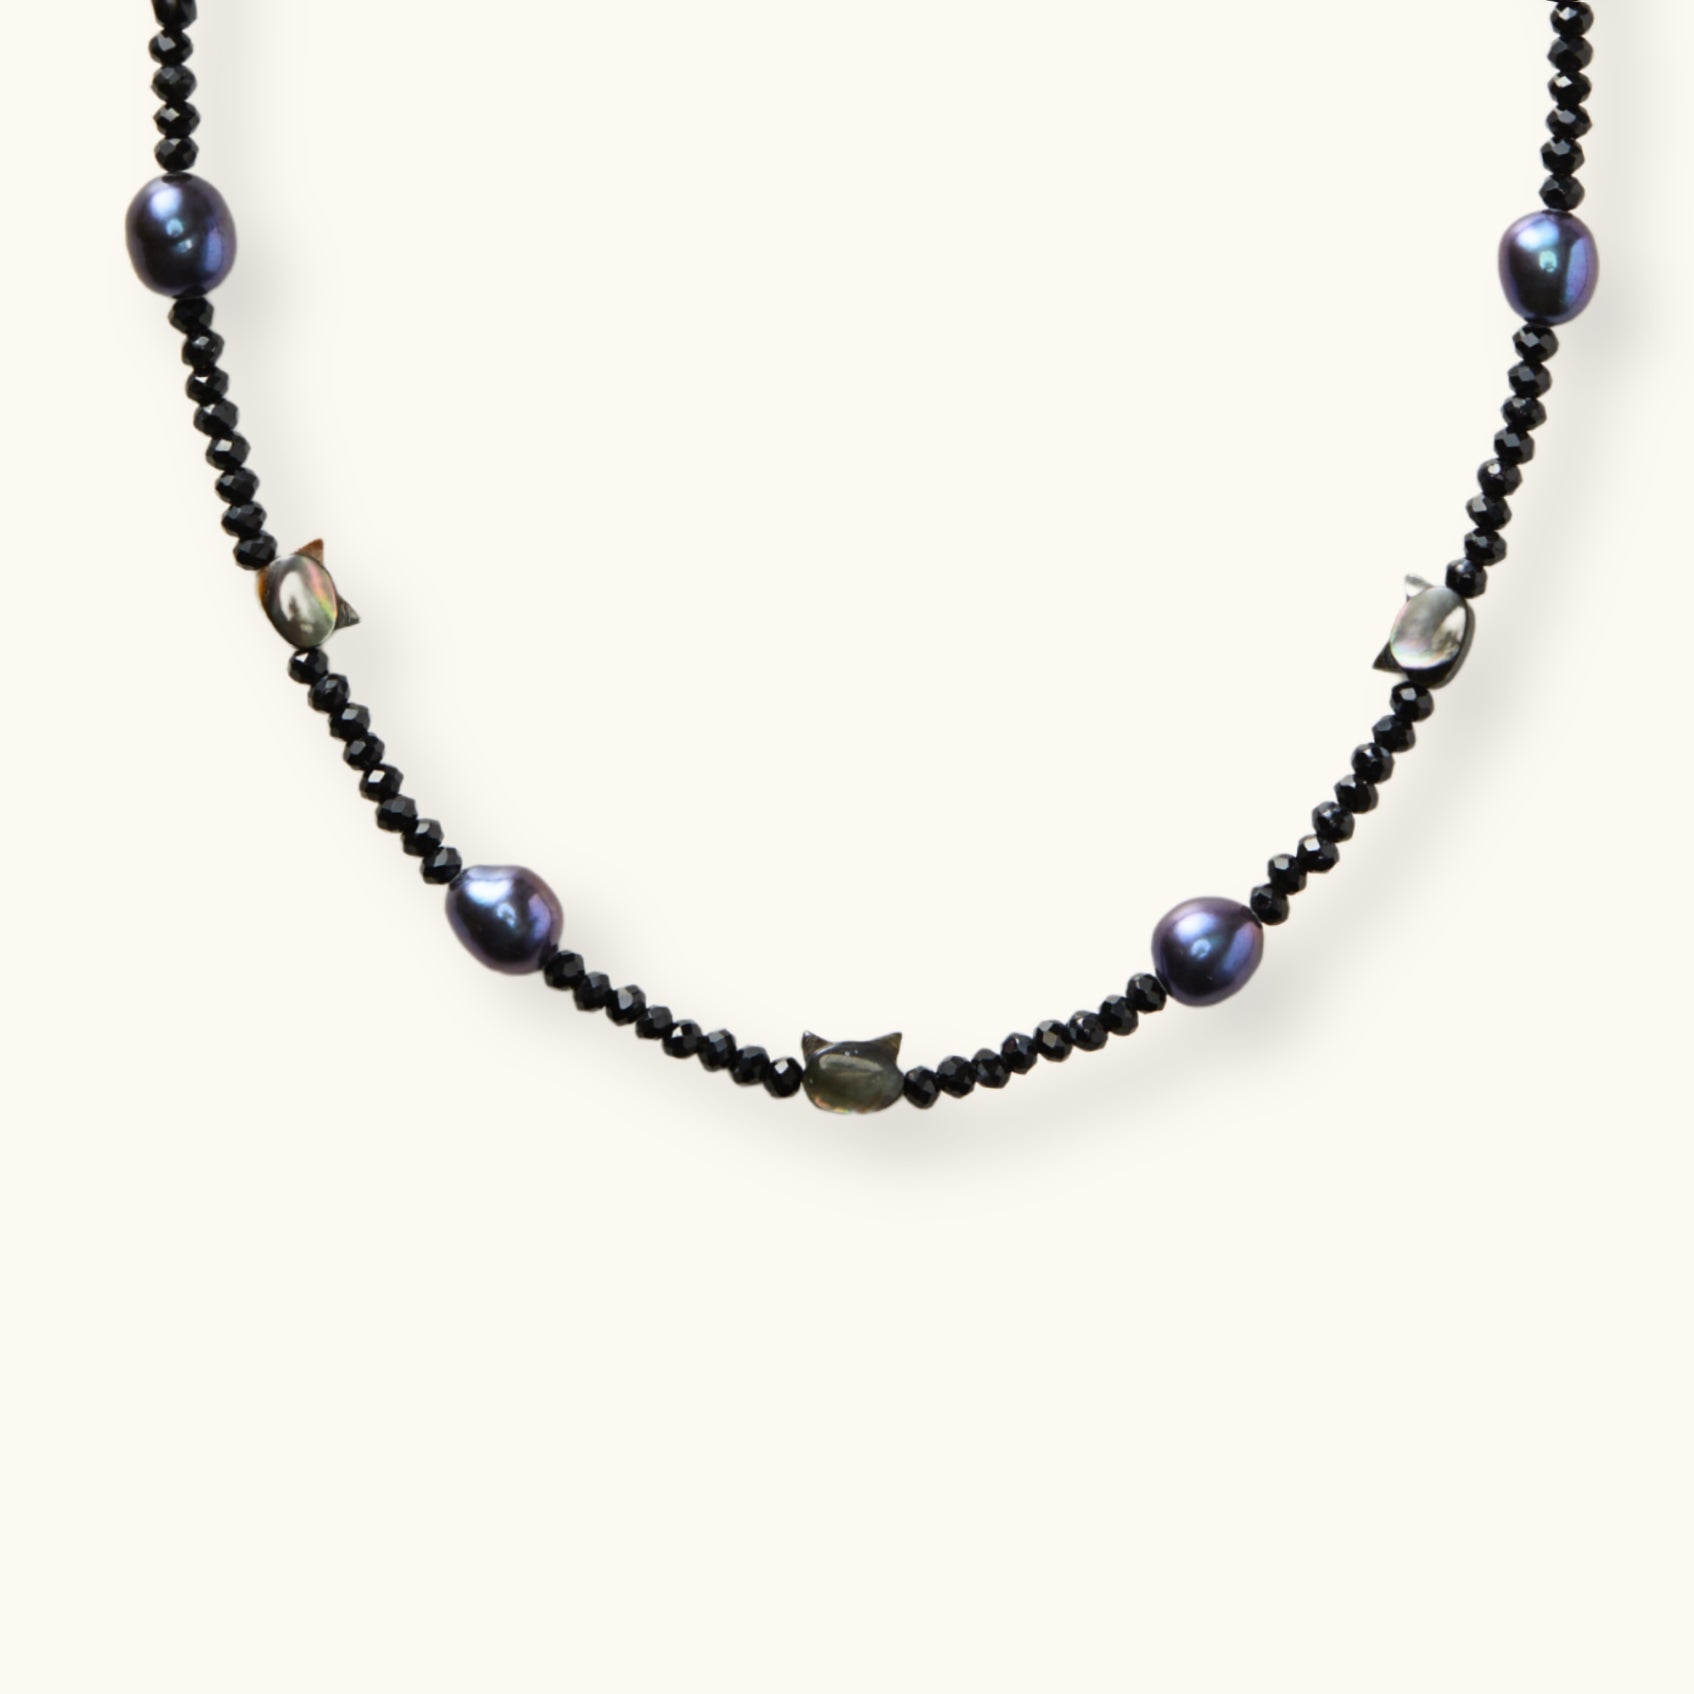 Handcrafted Necklace with Black Pearls, Faceted Onyx Beads, and Cat-Shaped Mother-of-Pearl Accents